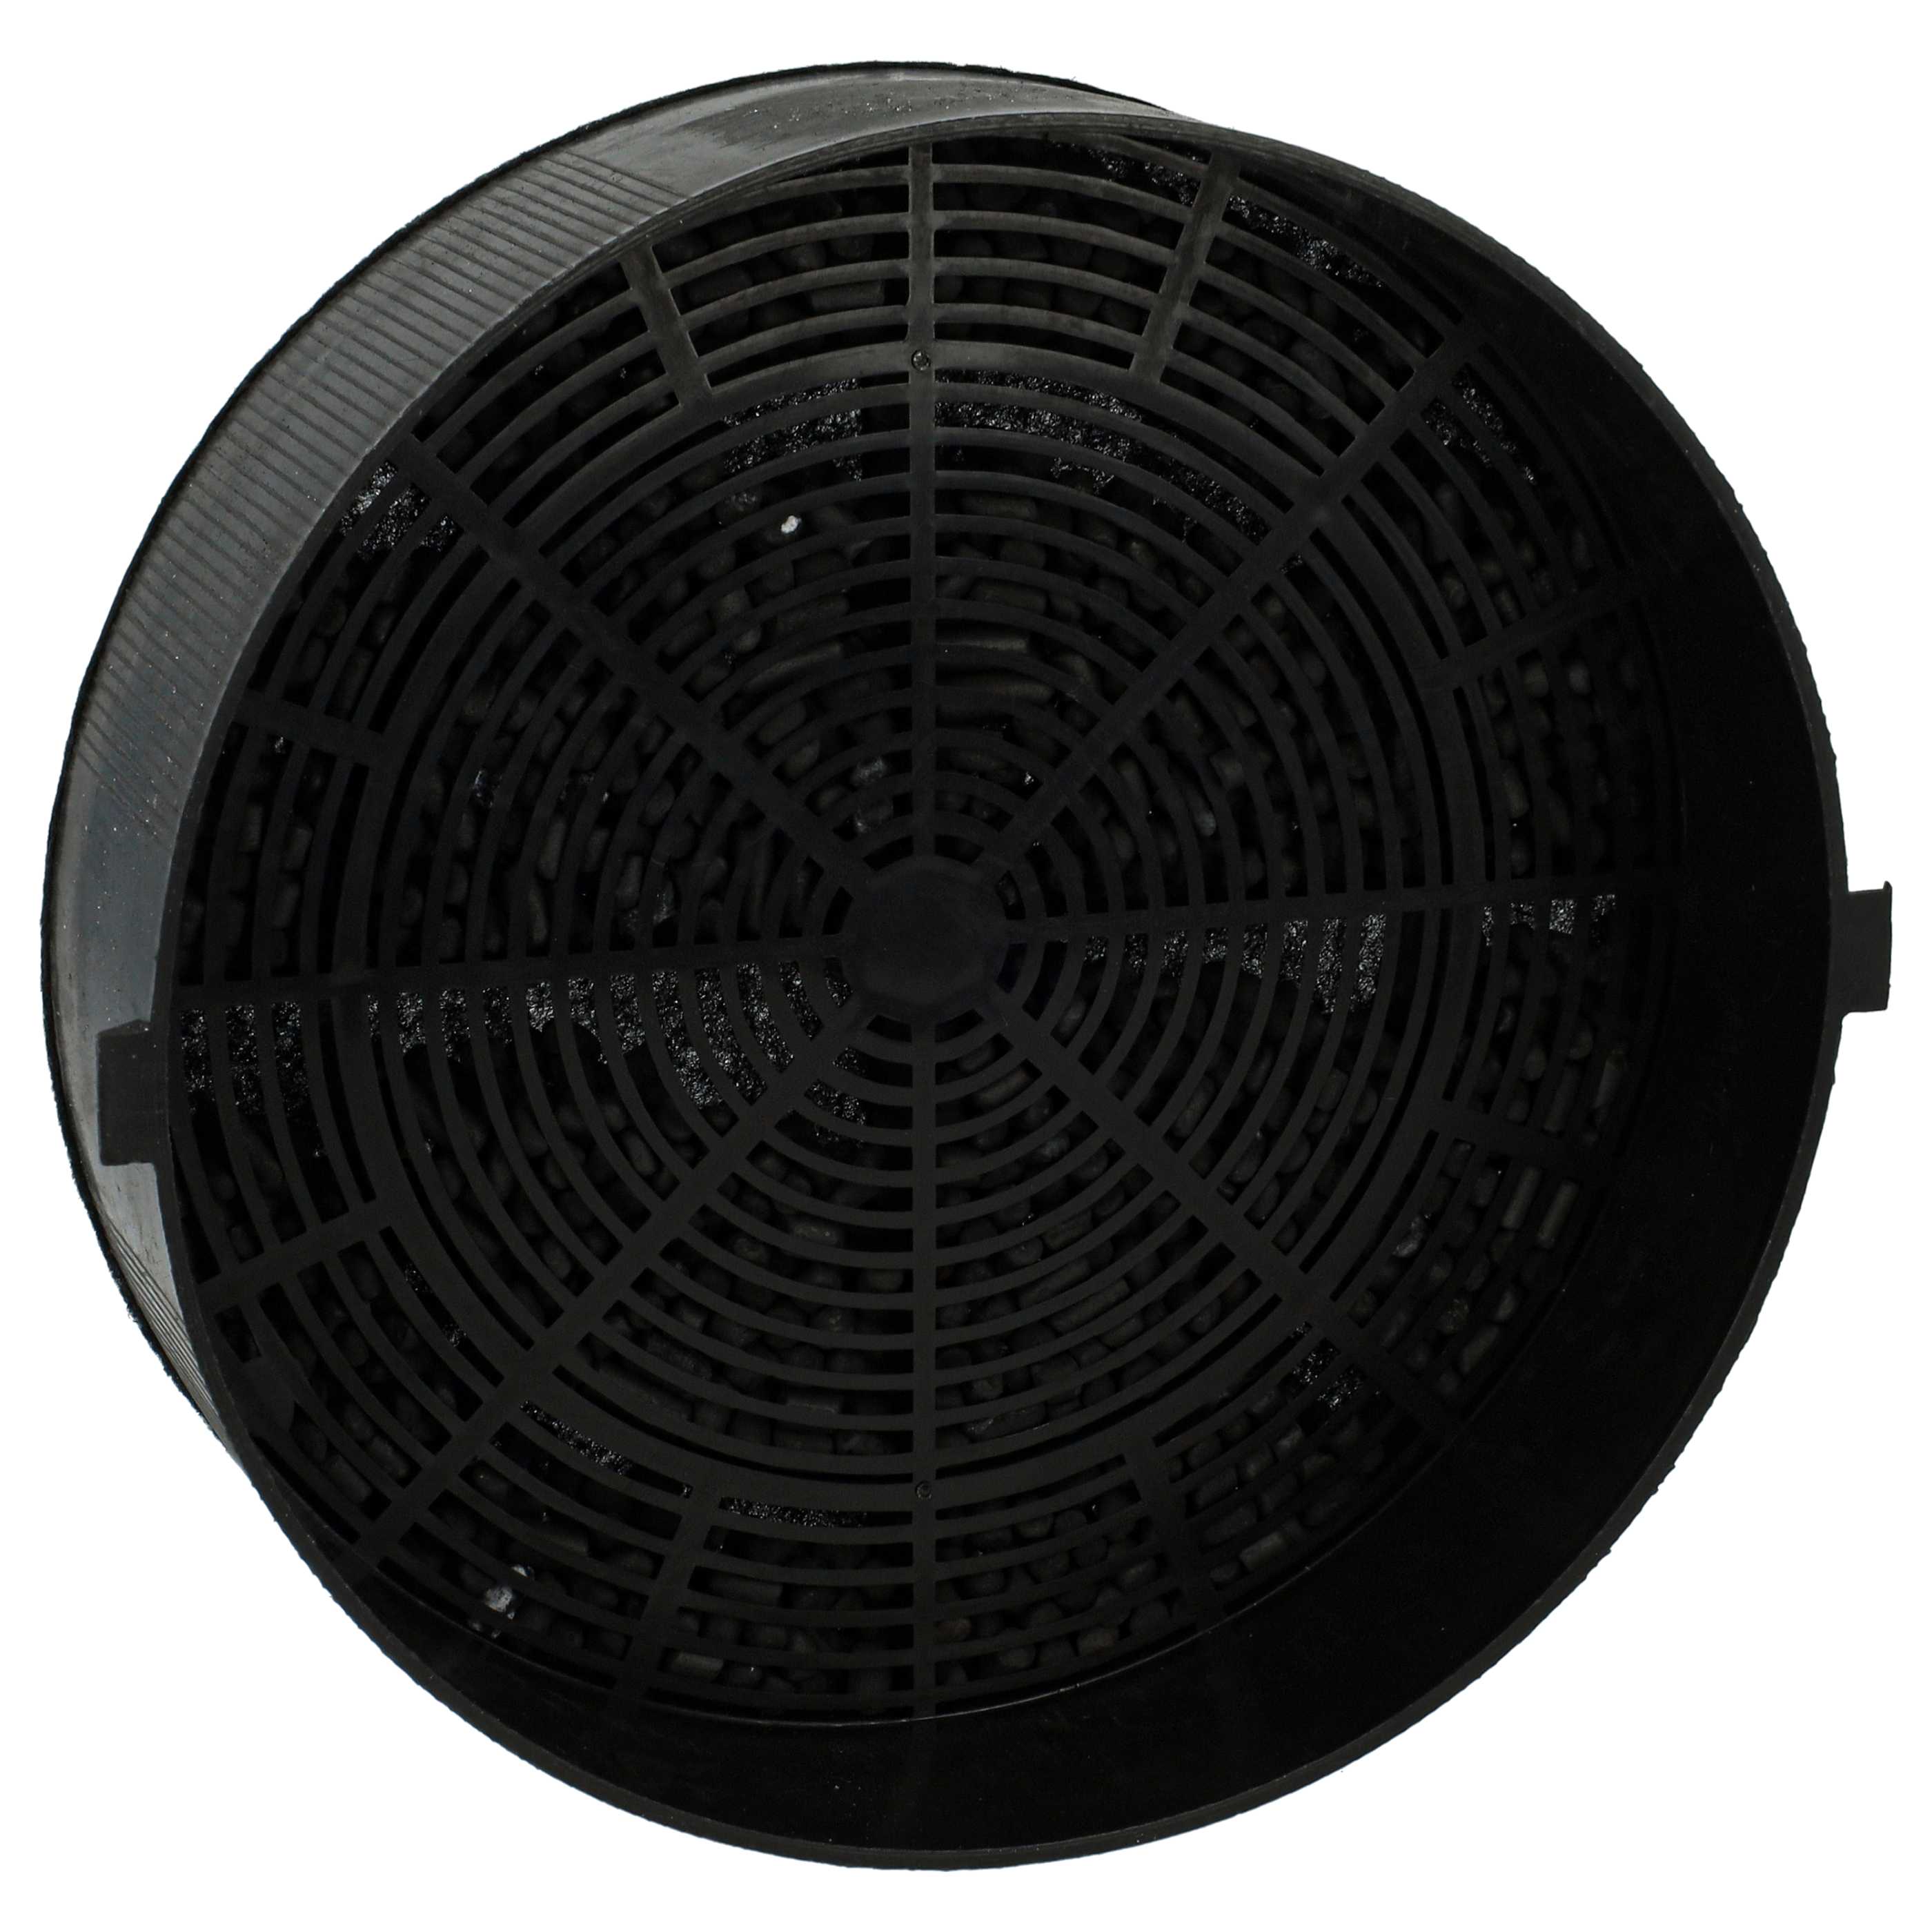 Activated Carbon Filter Suitable for GZD1125 Alno Hob etc. - 16 cm